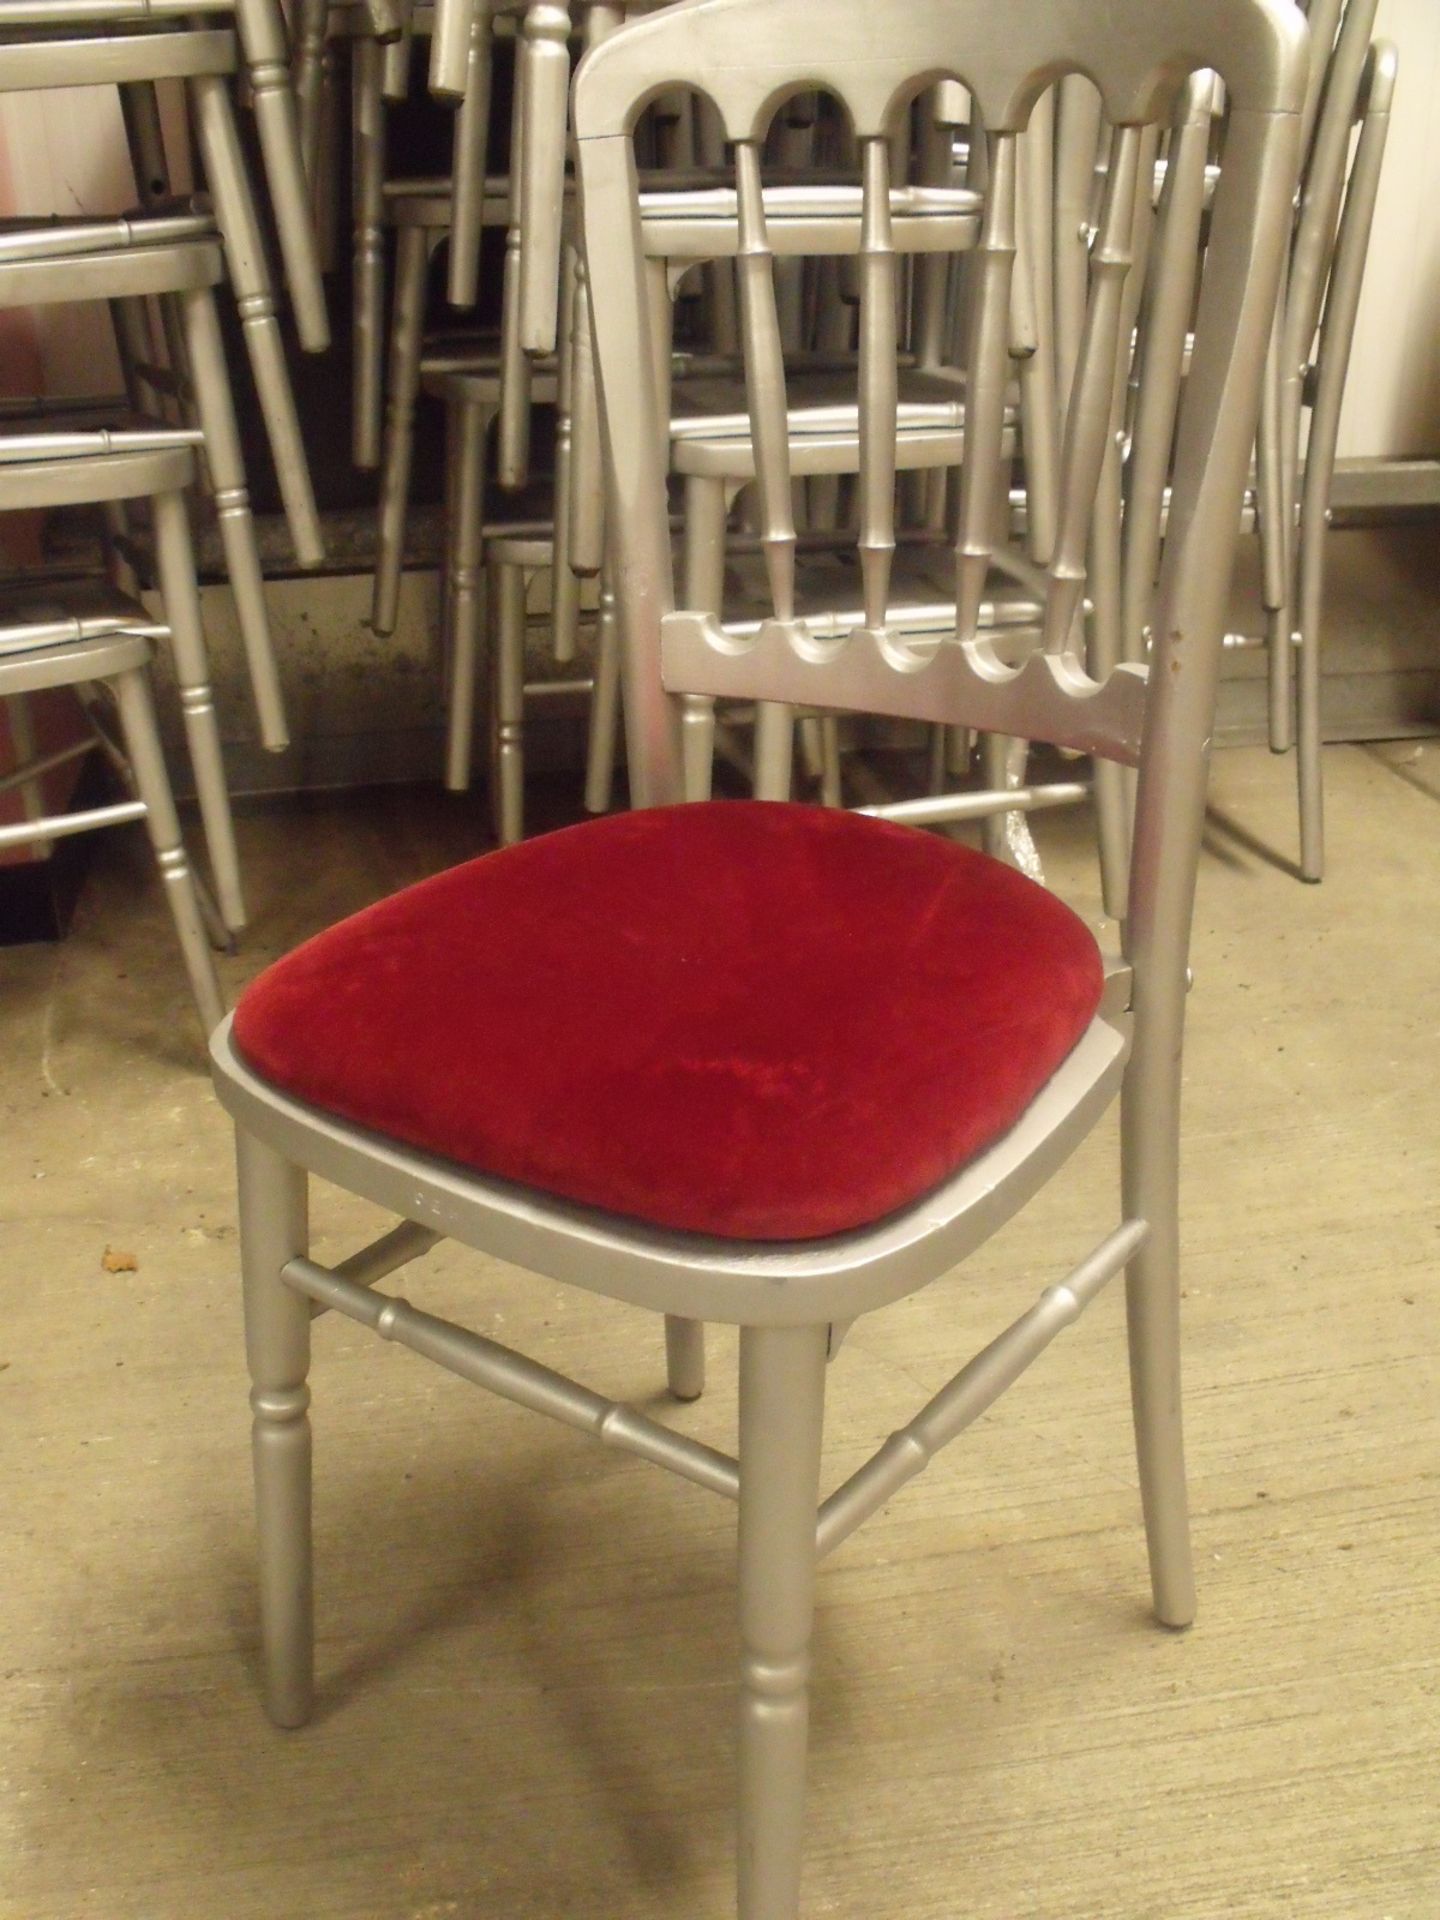 30 x Stacking Silver Cheltenham style wooden banqueting chairs burgundy velour Velcro seat pad